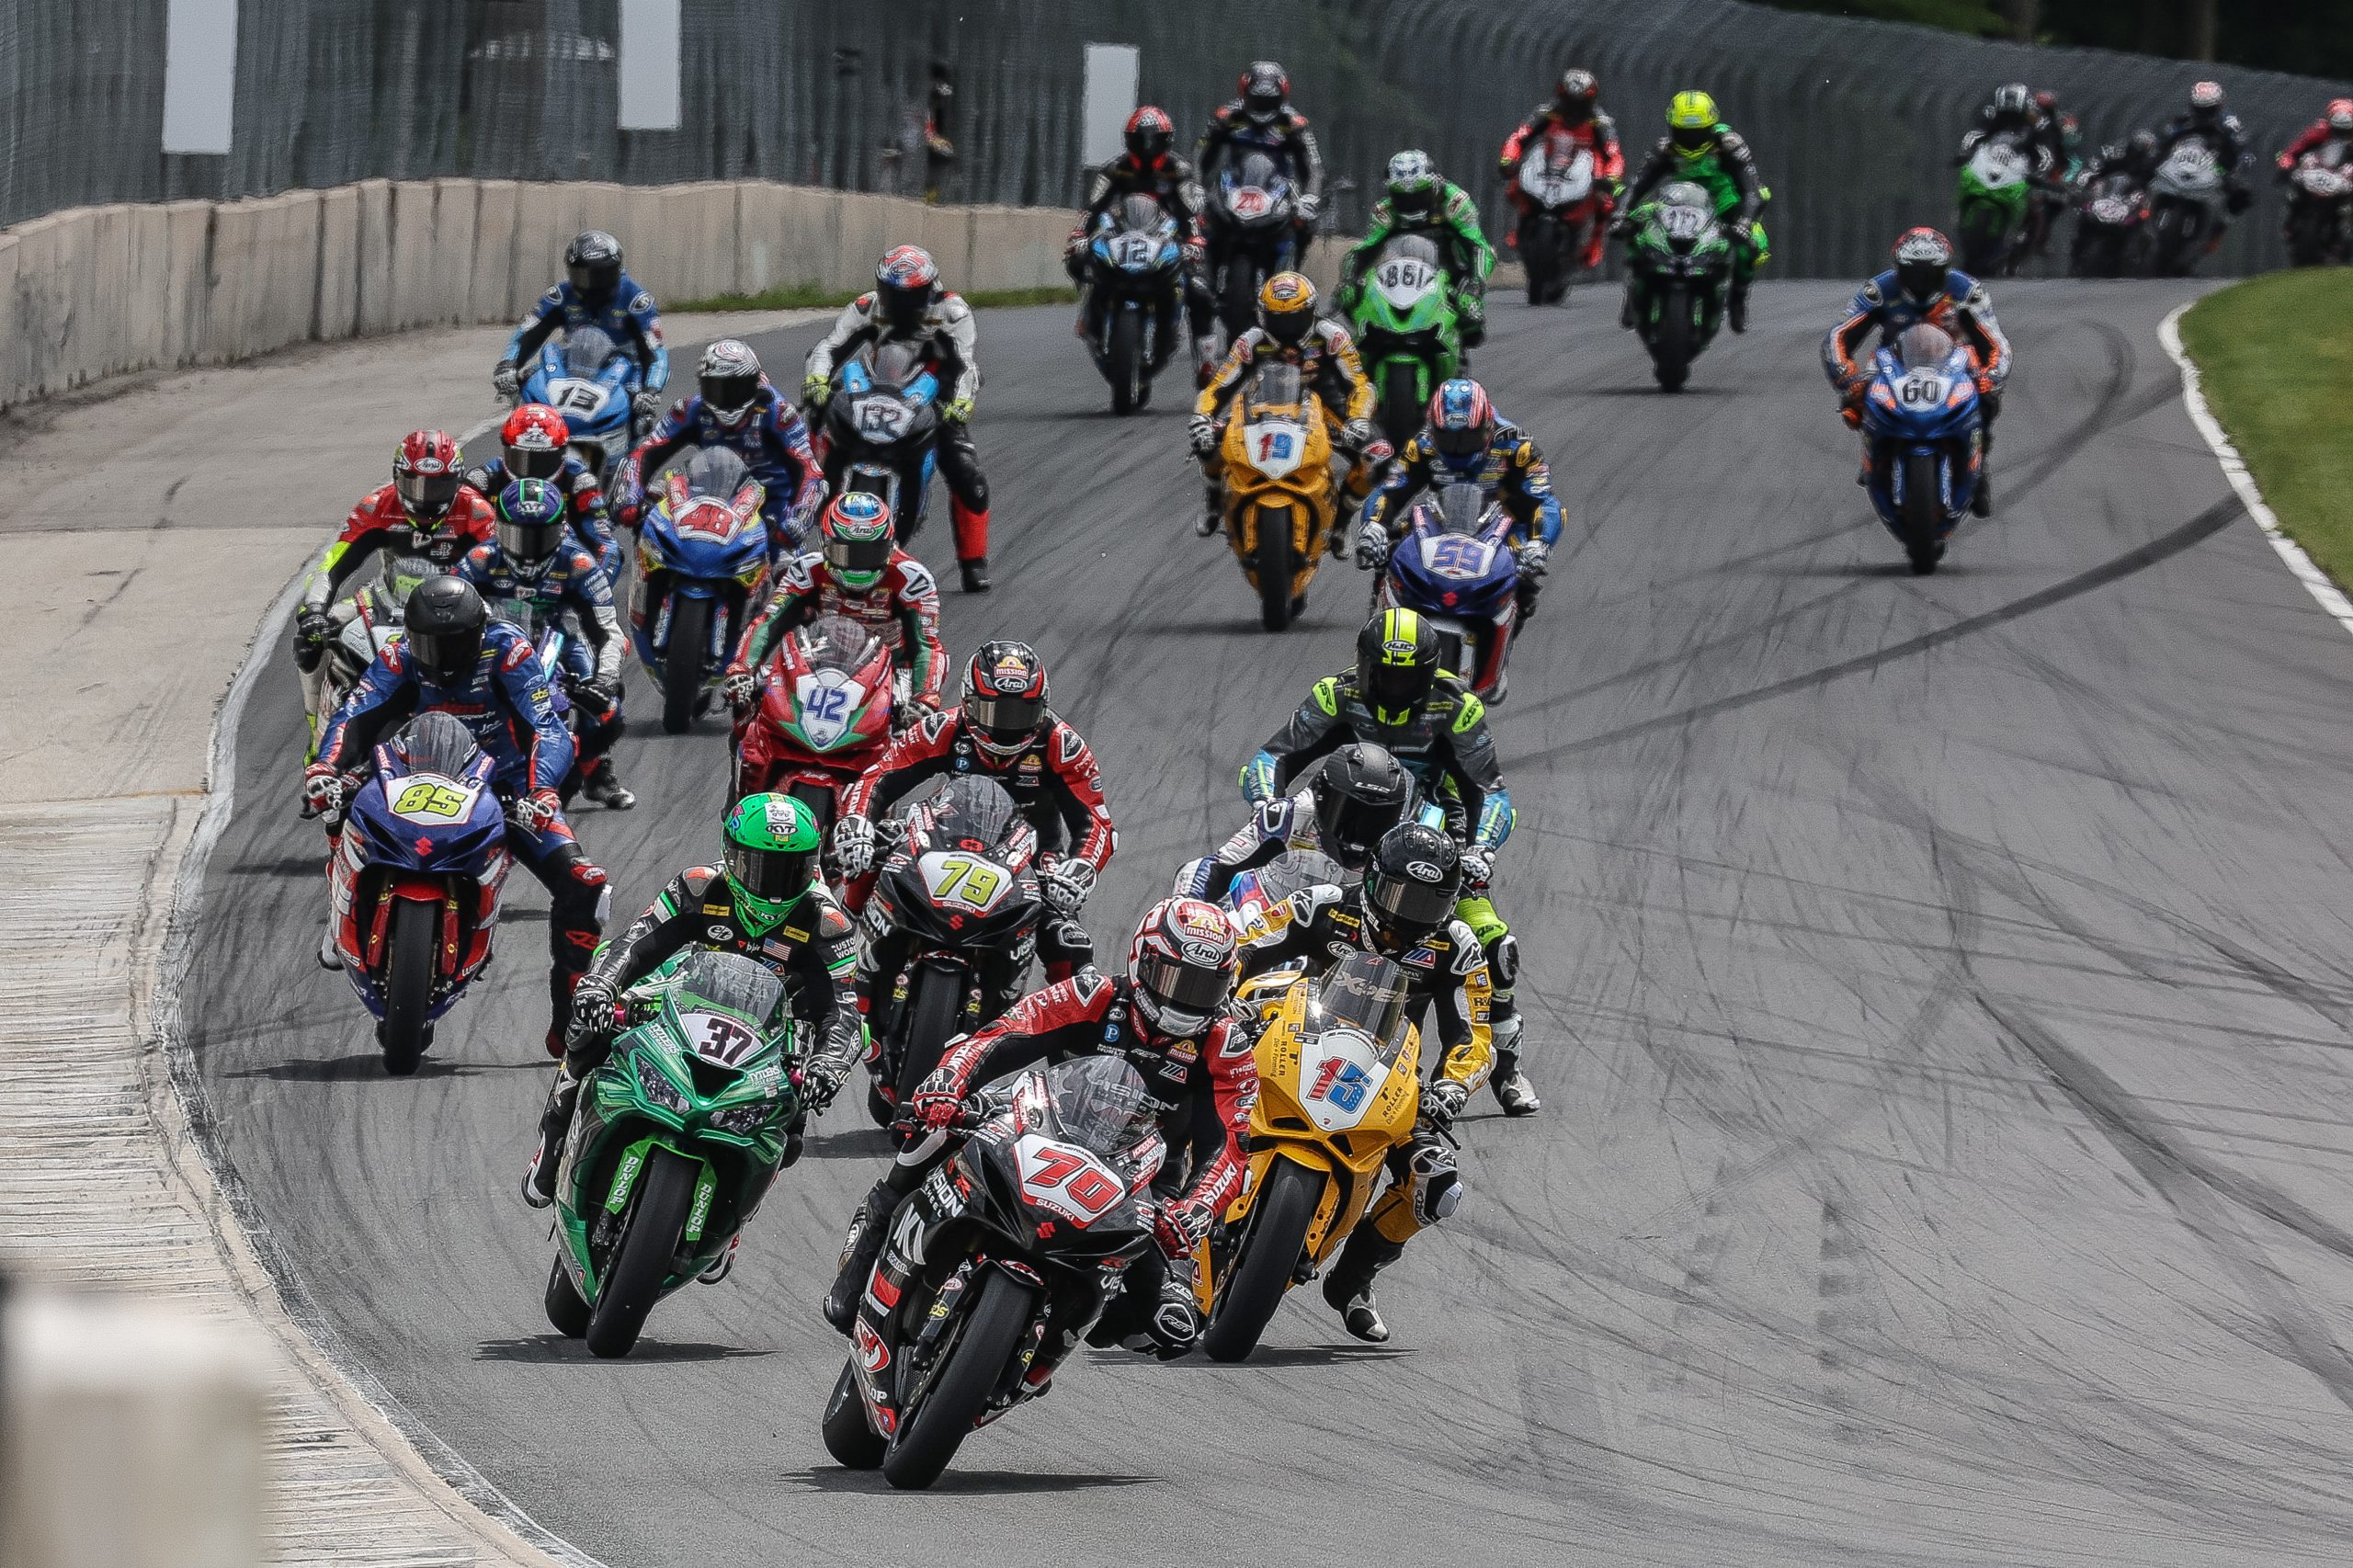 How Close Is Close? Scott Wins Supersport At Road America By .001 Of A Second